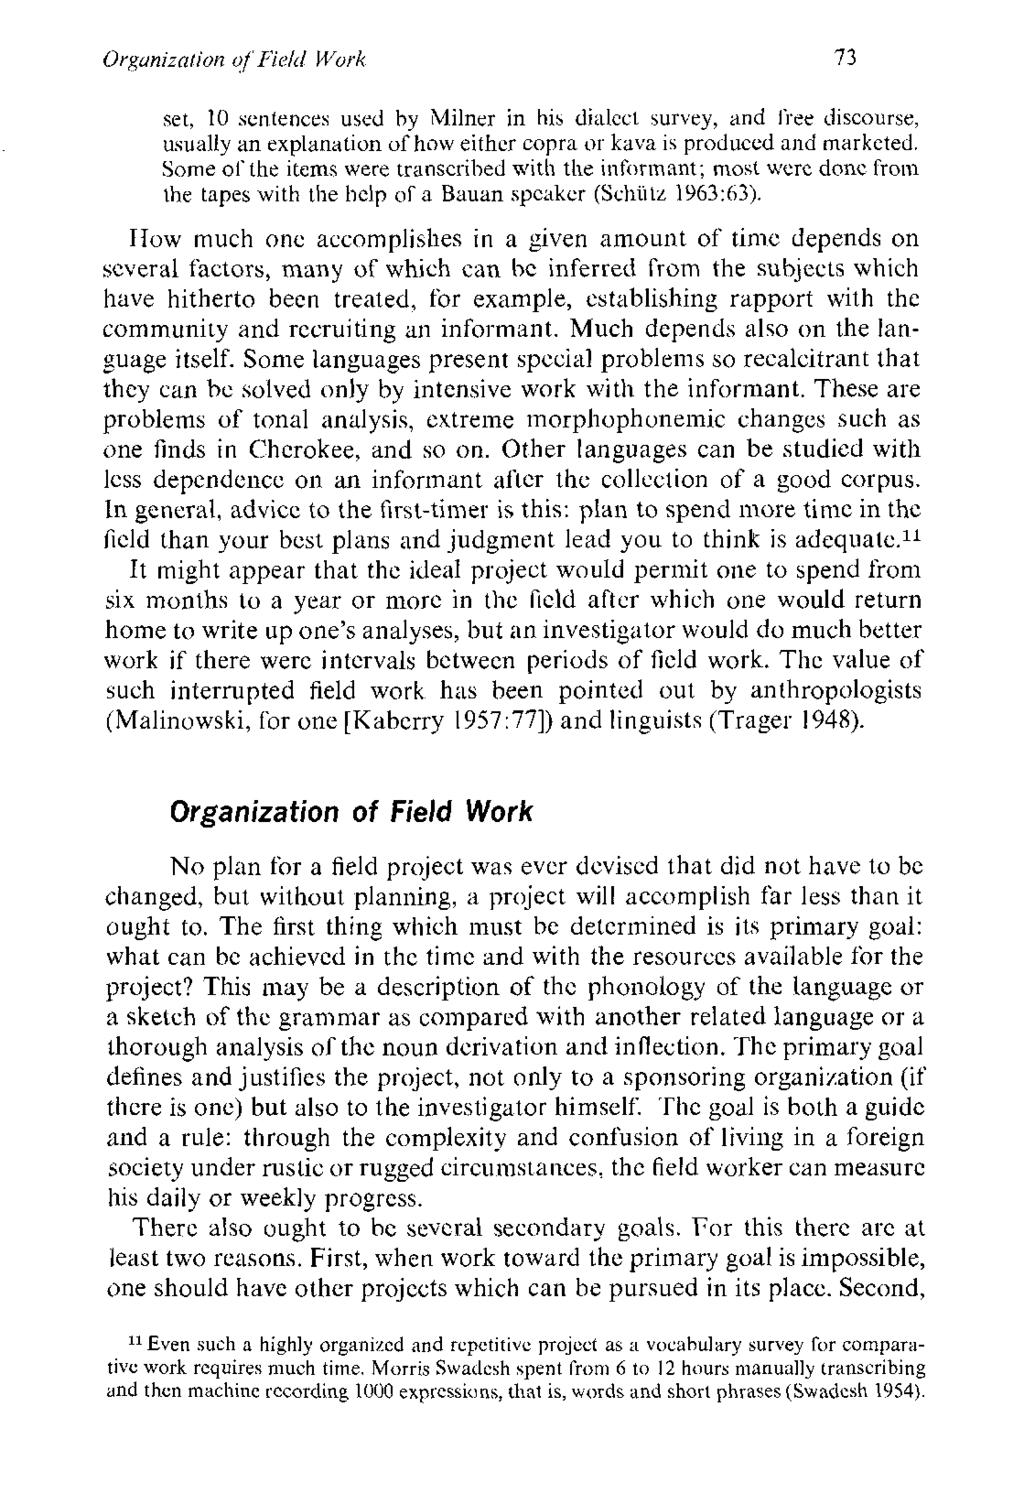 Organization of Field Work 73 set, 10 sentences used by Milner in his dialect survey, and free discourse, usually an explanation of how either copra or kava is produced and marketed.